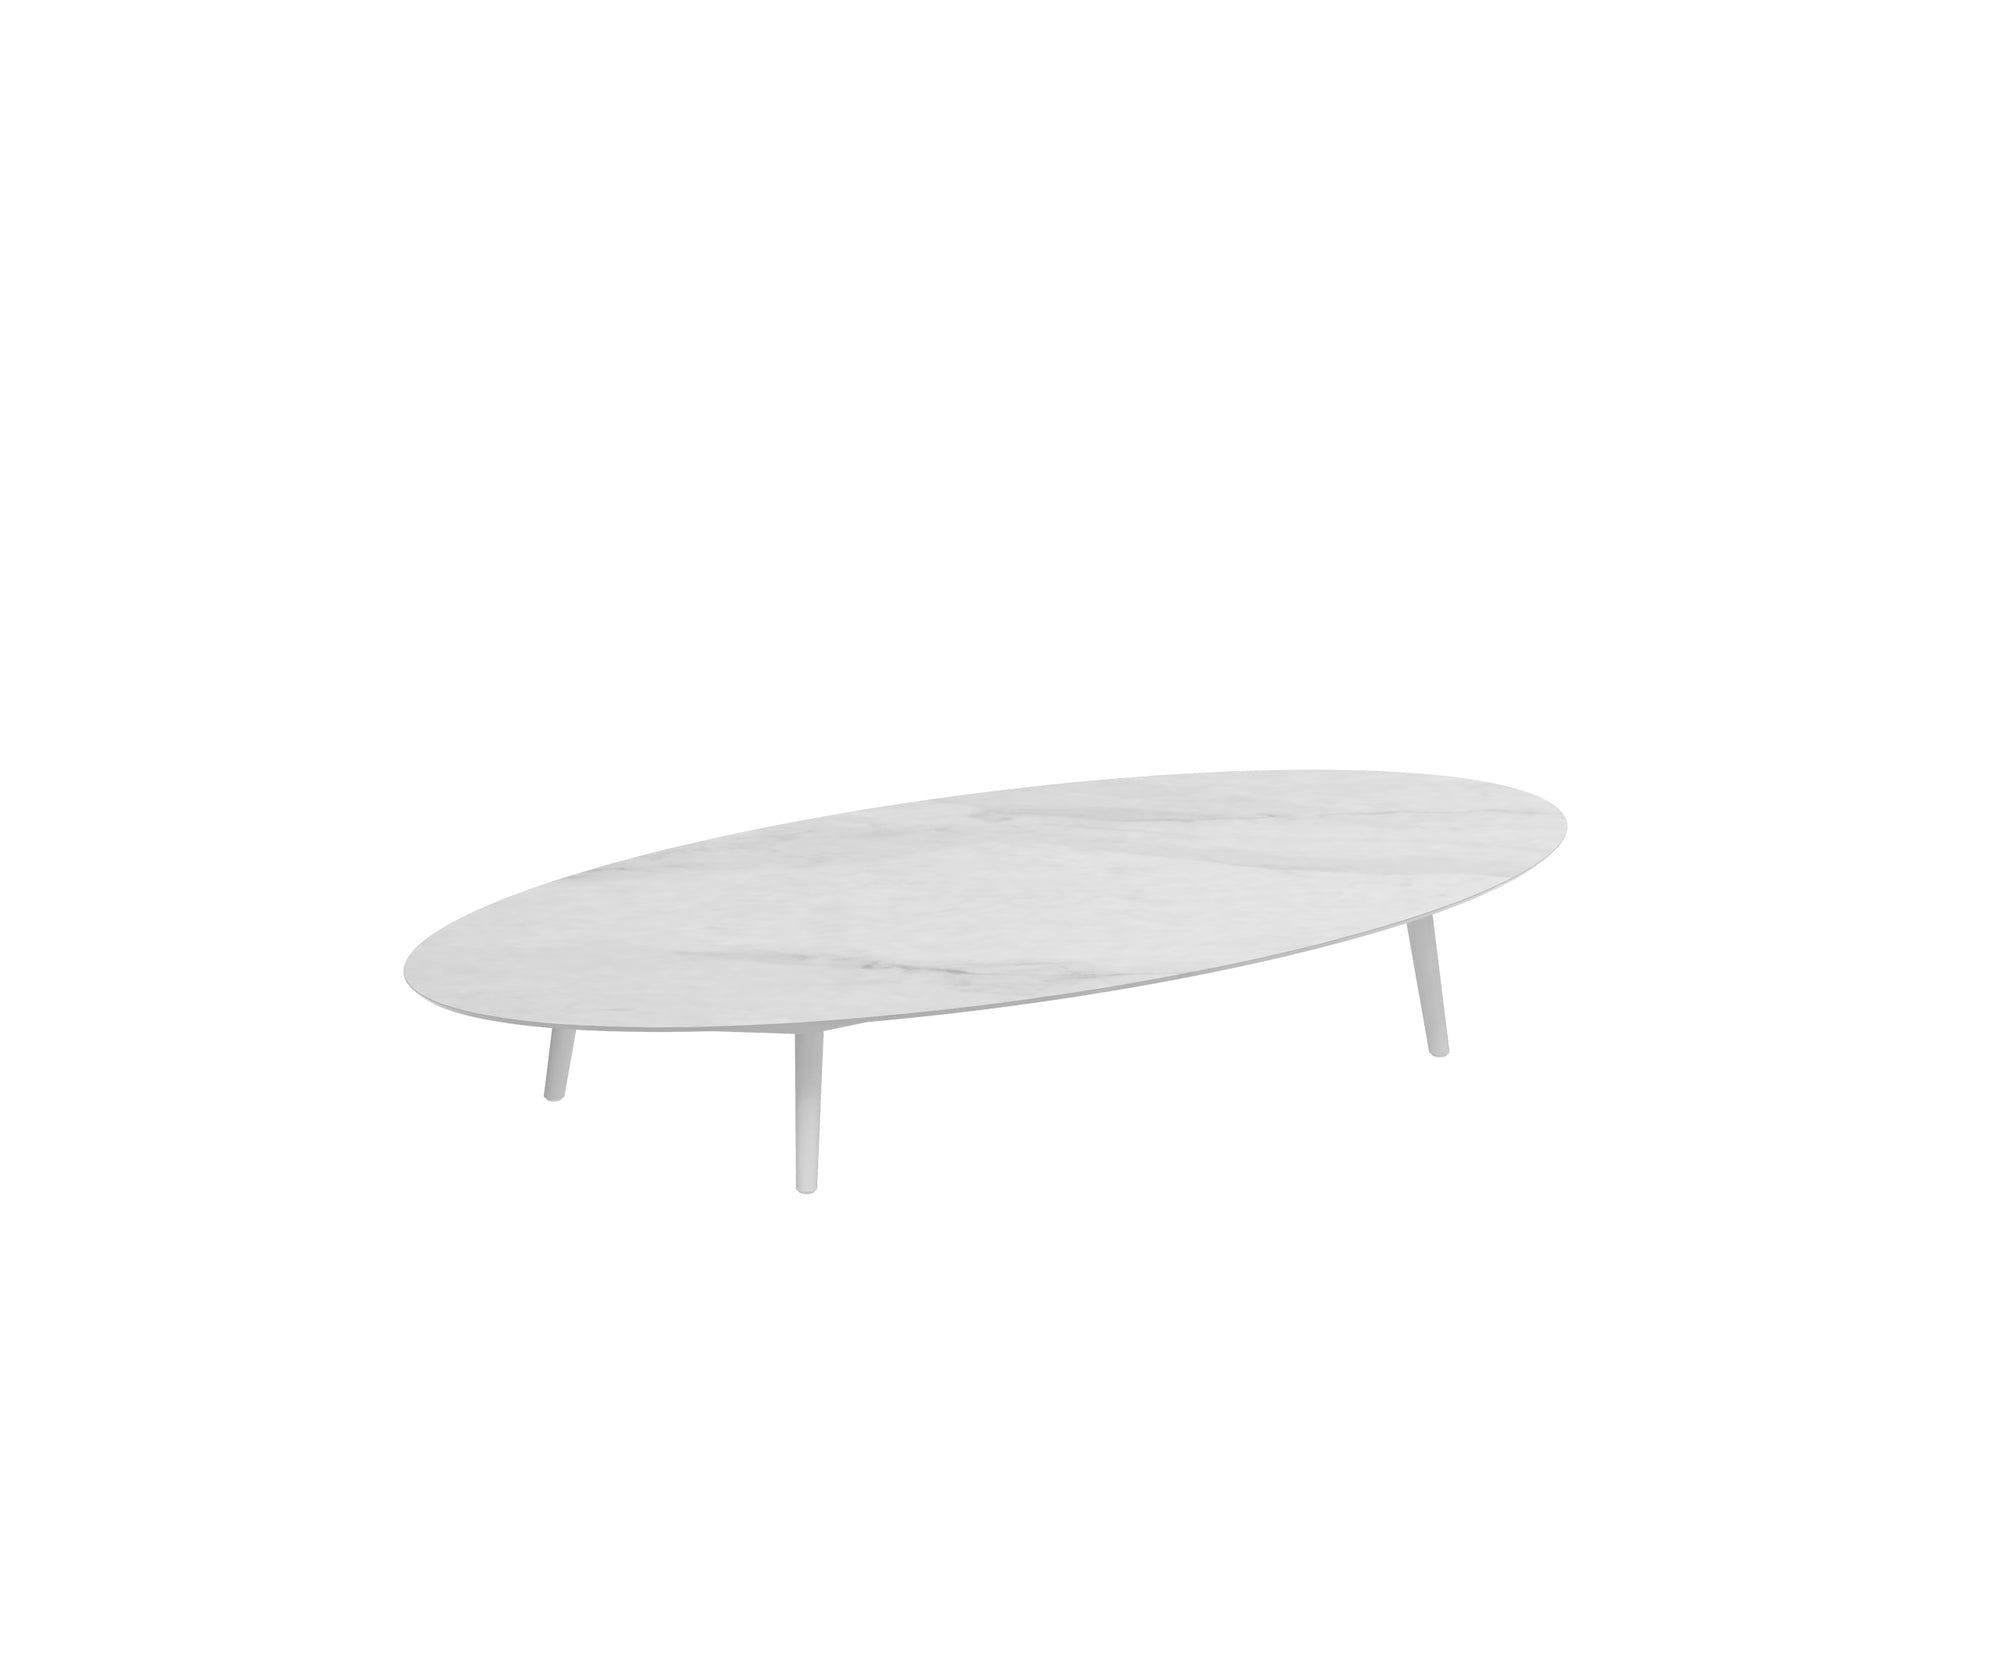 Styletto Oval Low Lounge Table | Royal Botania